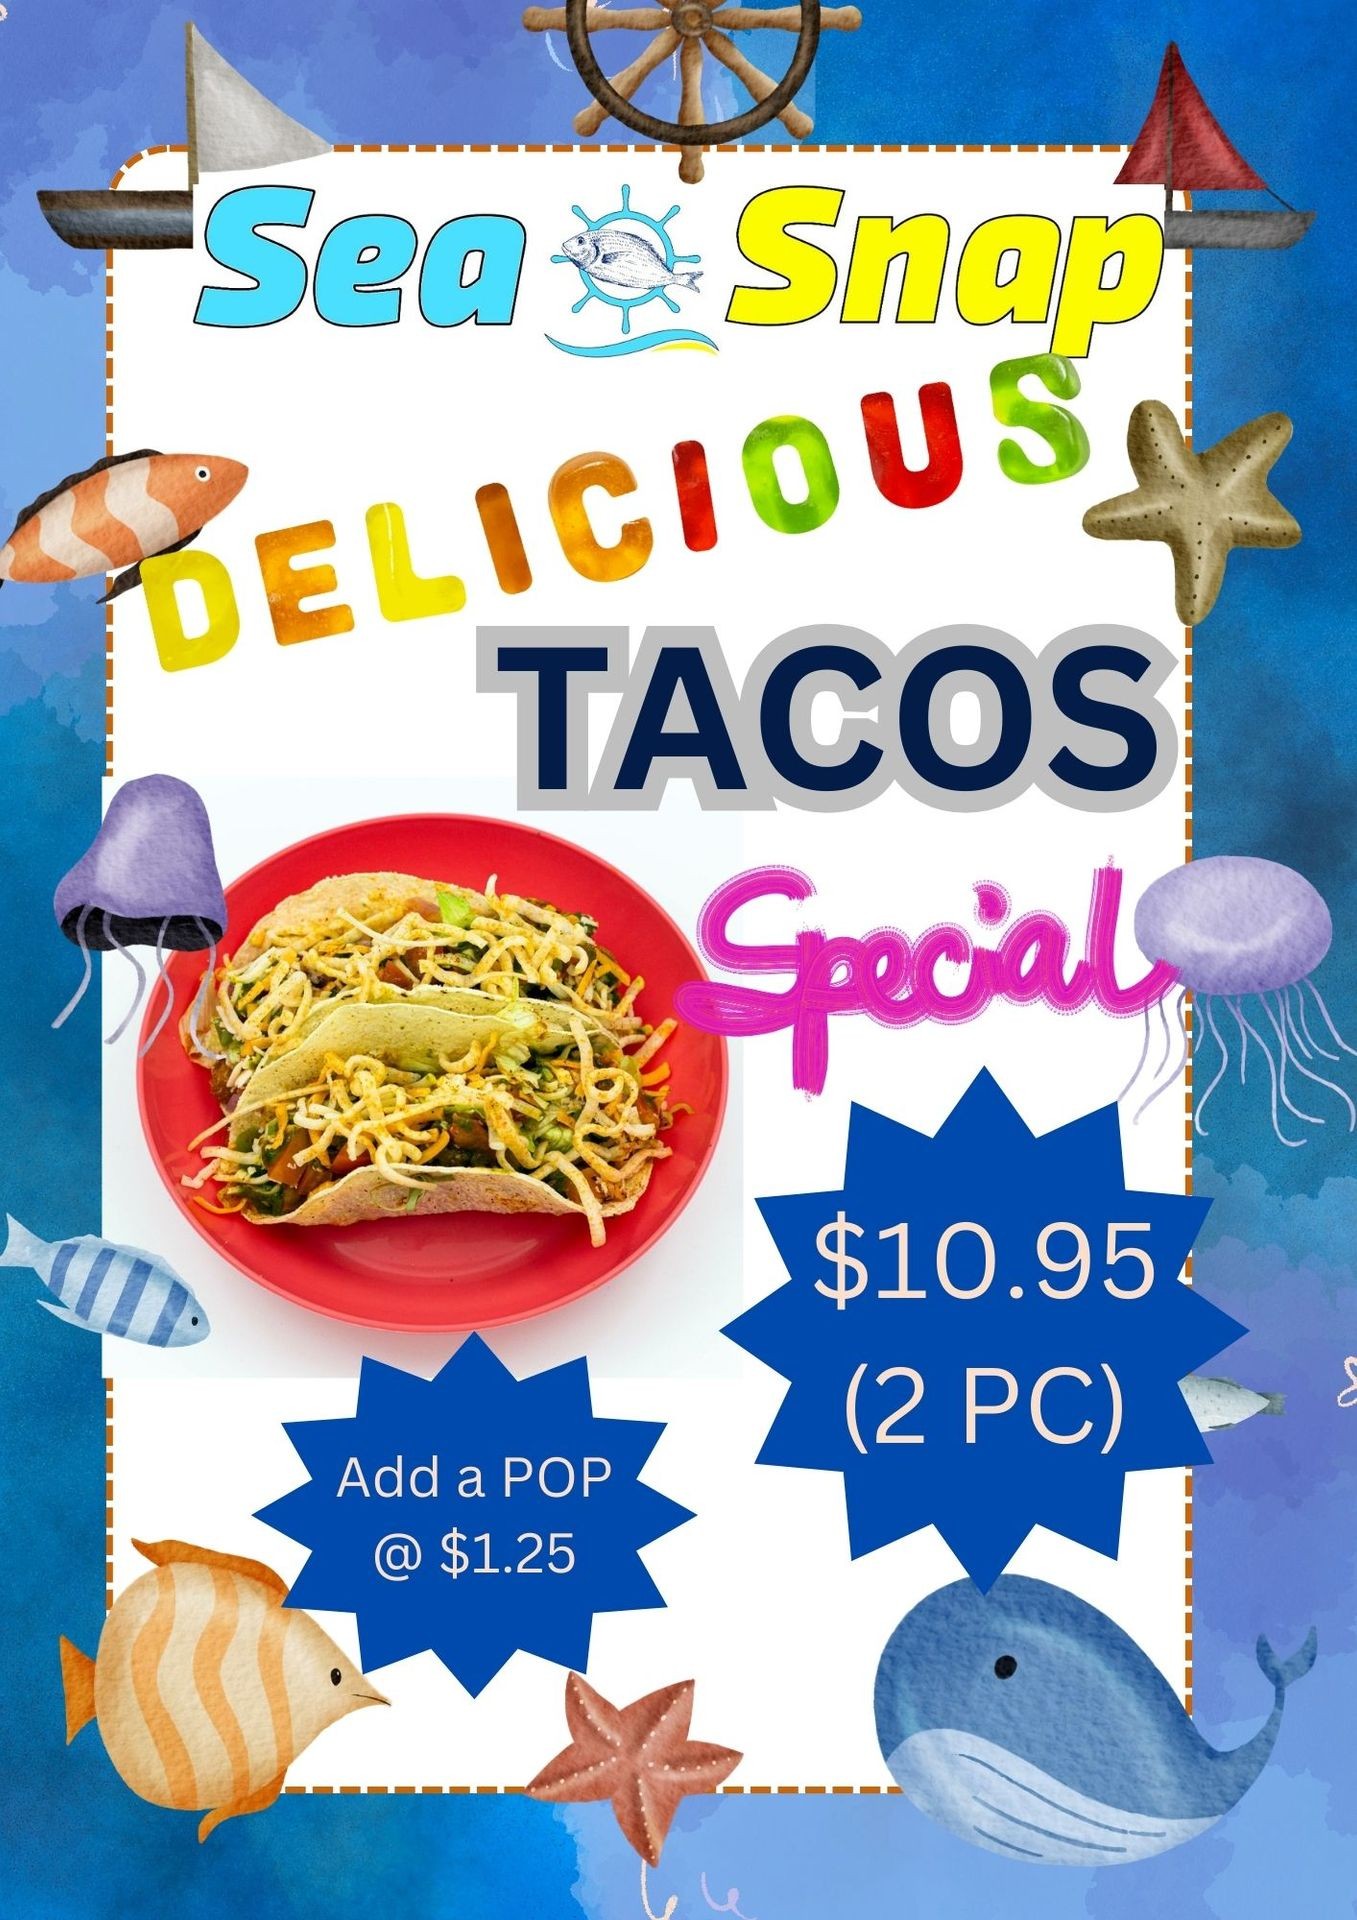 Deal of The Month !! Enjoy 2 PCs Taco for $10.95